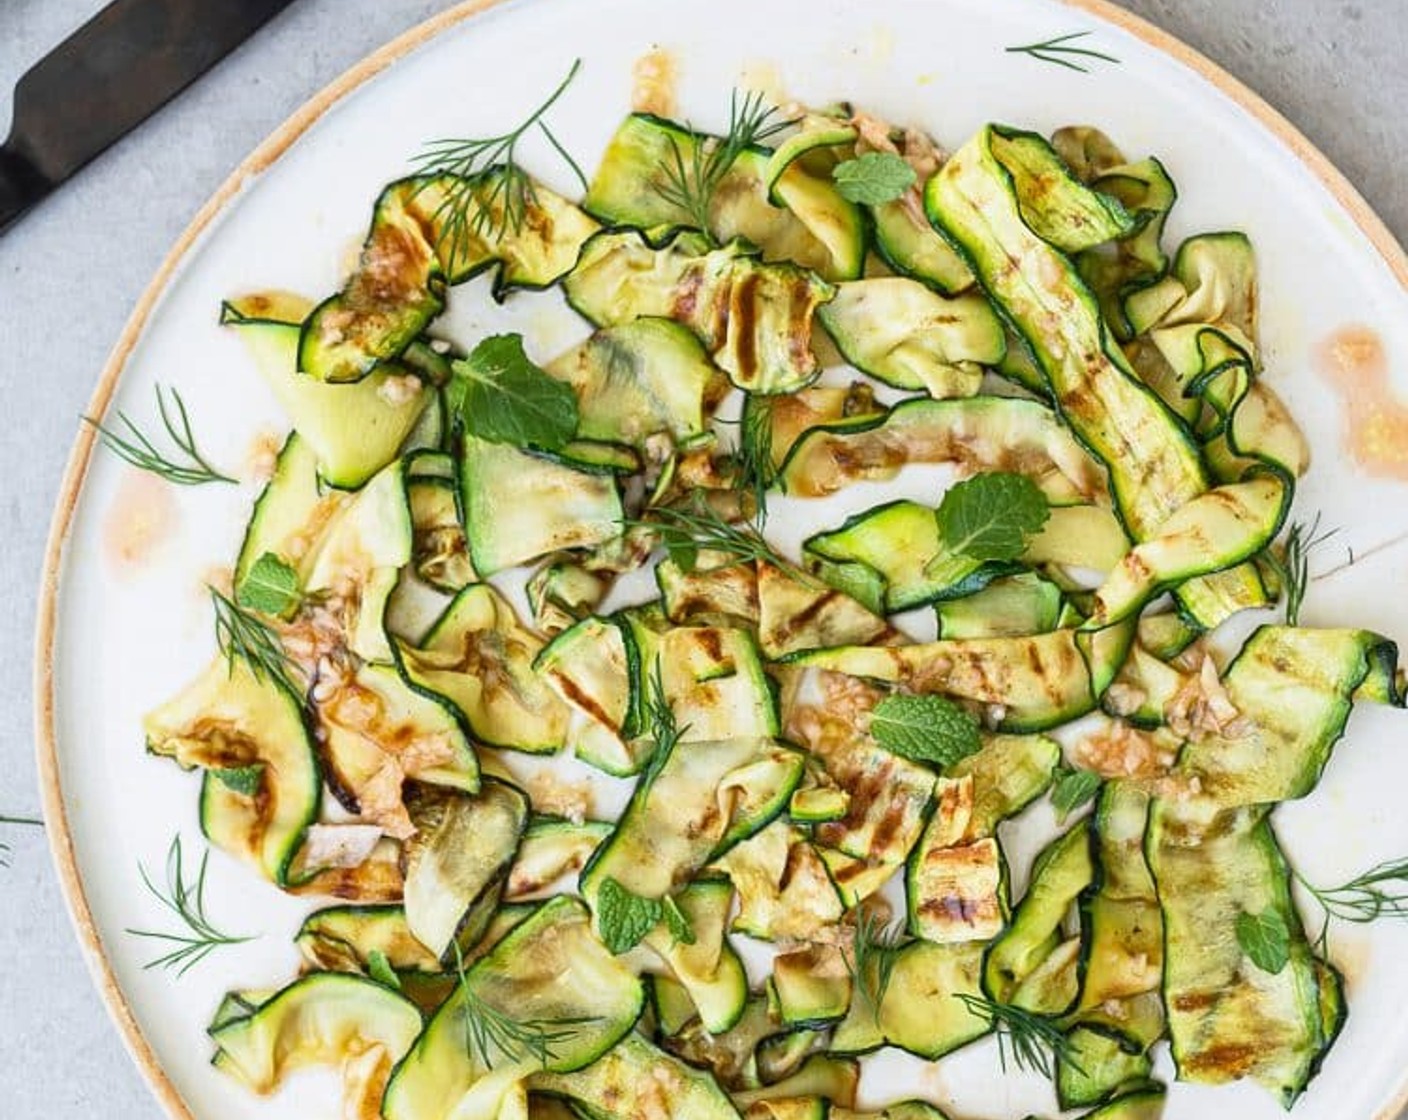 step 6 Lightly drizzle the dressing over the courgette “ribbons” and serve.